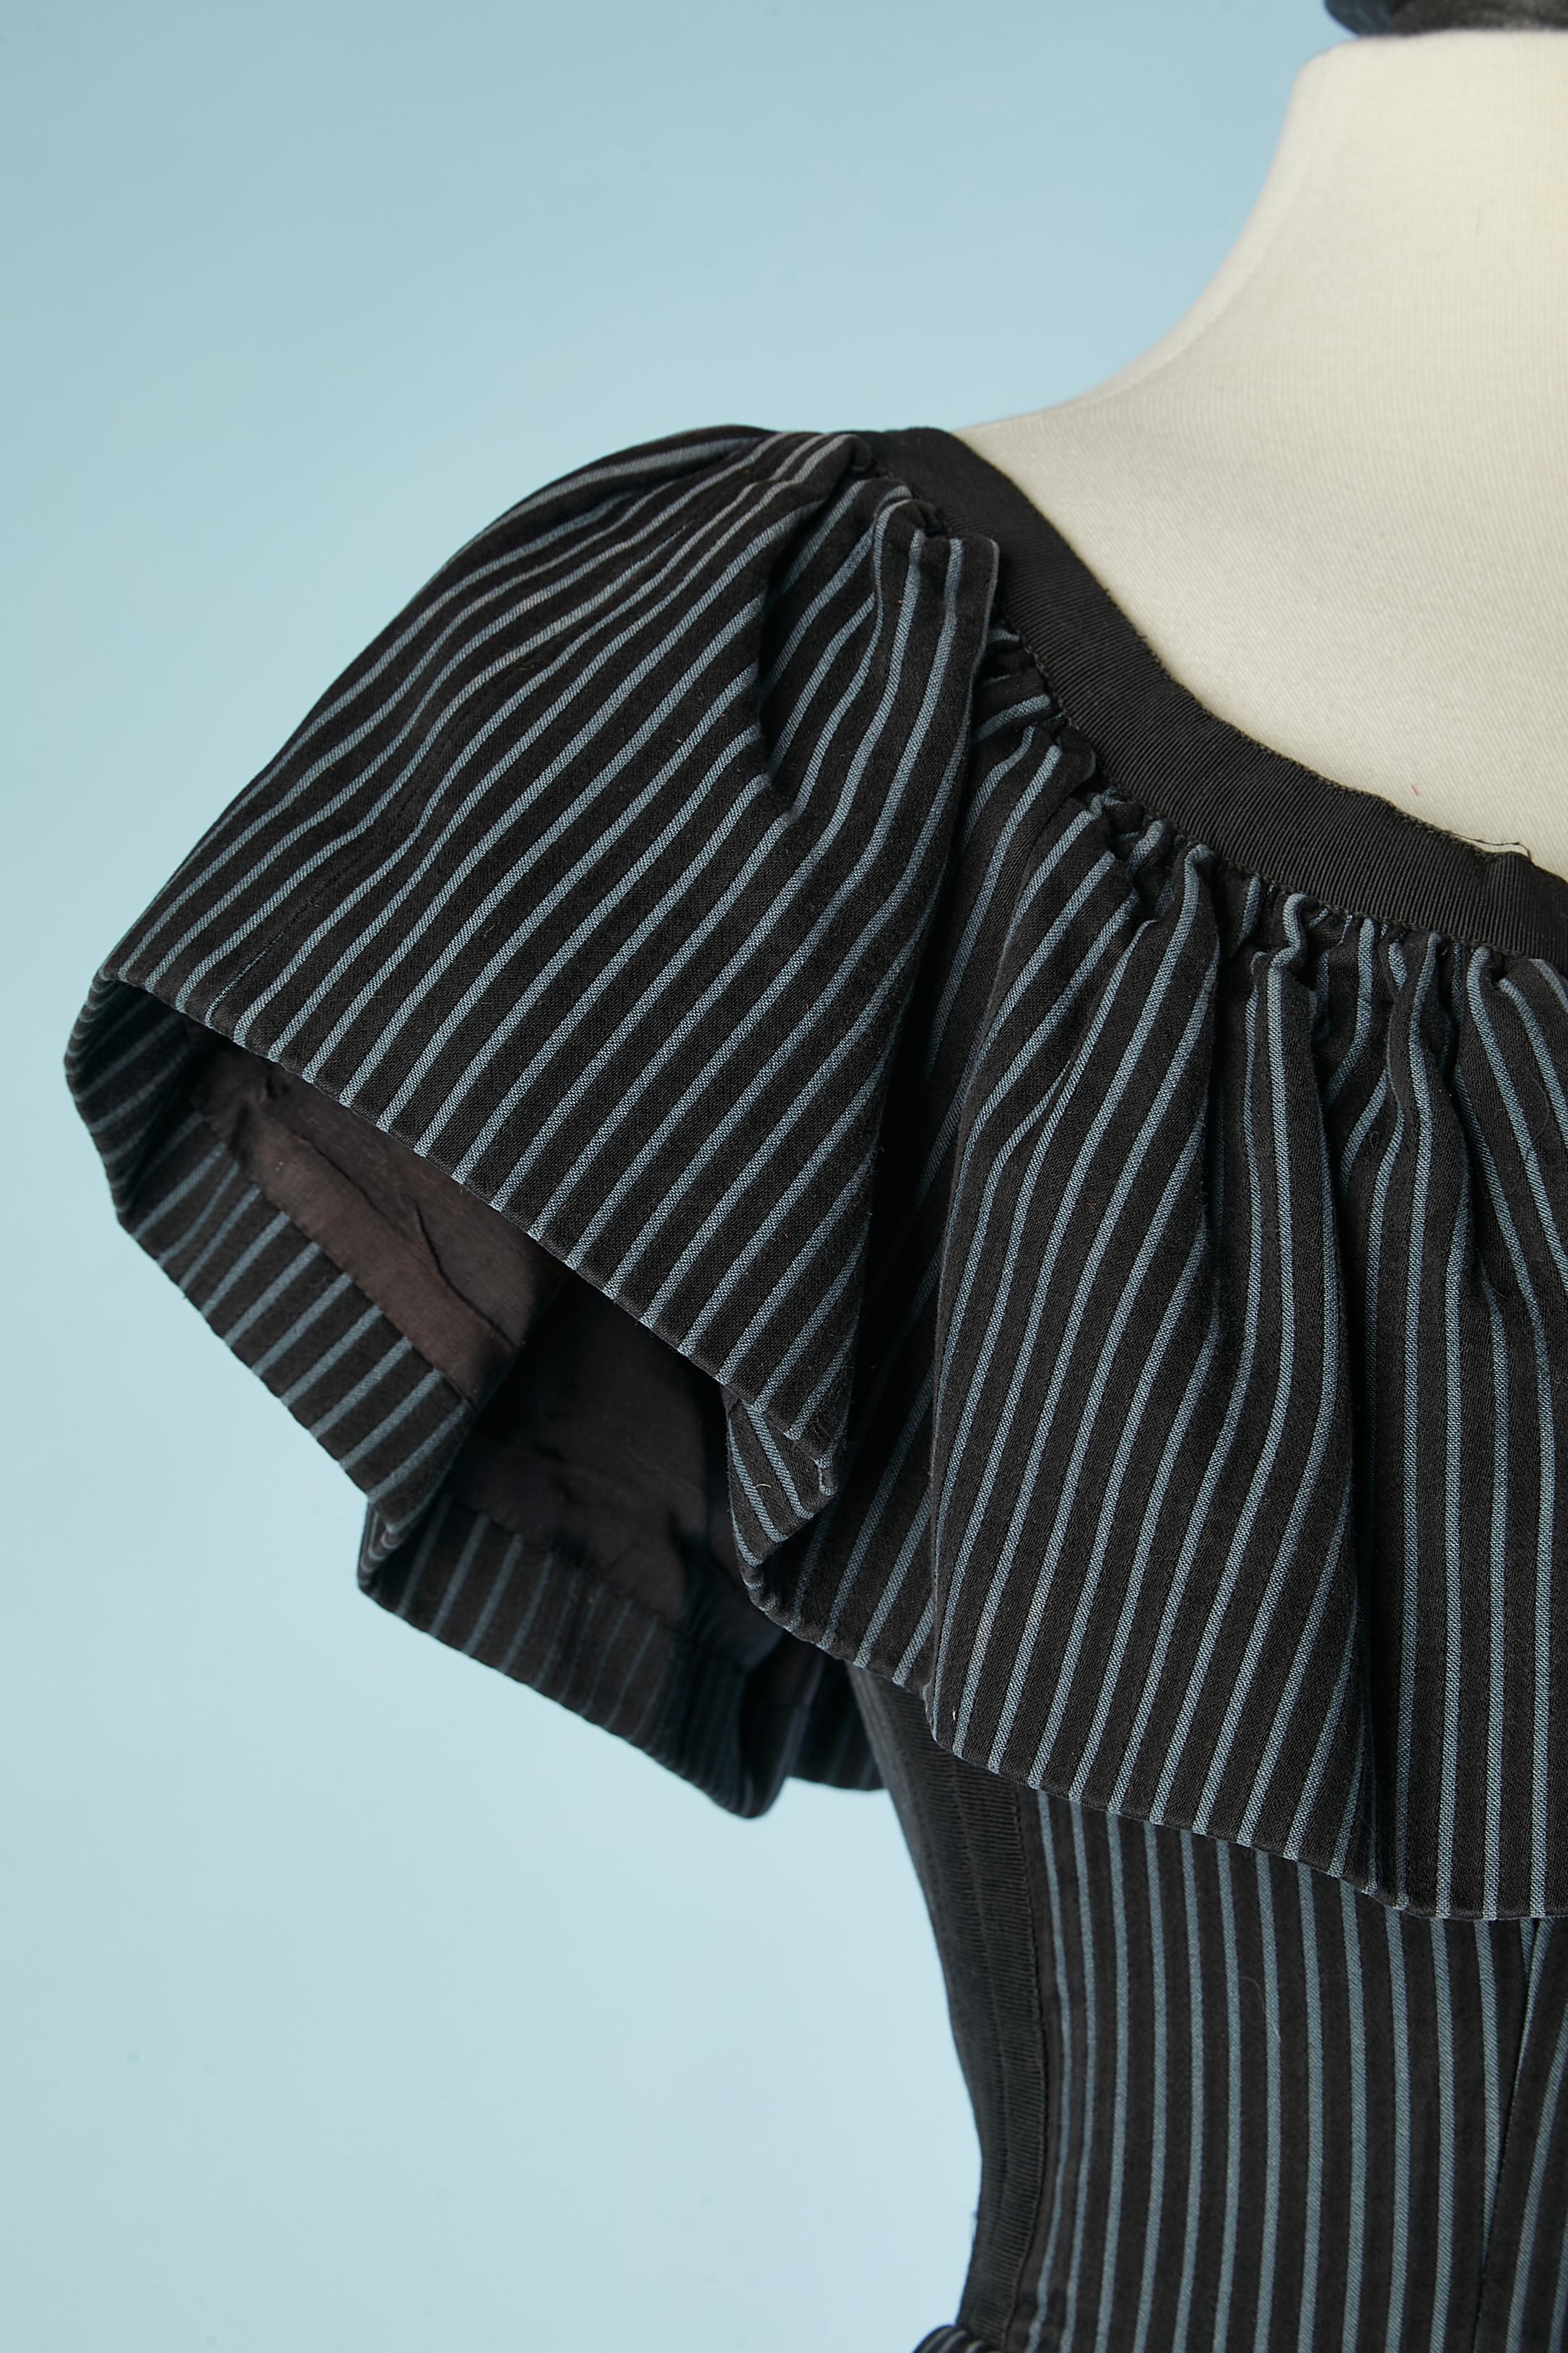 Black cotton dress with blue stripes, ruffles and bow YSL Rive Gauche  In Good Condition For Sale In Saint-Ouen-Sur-Seine, FR